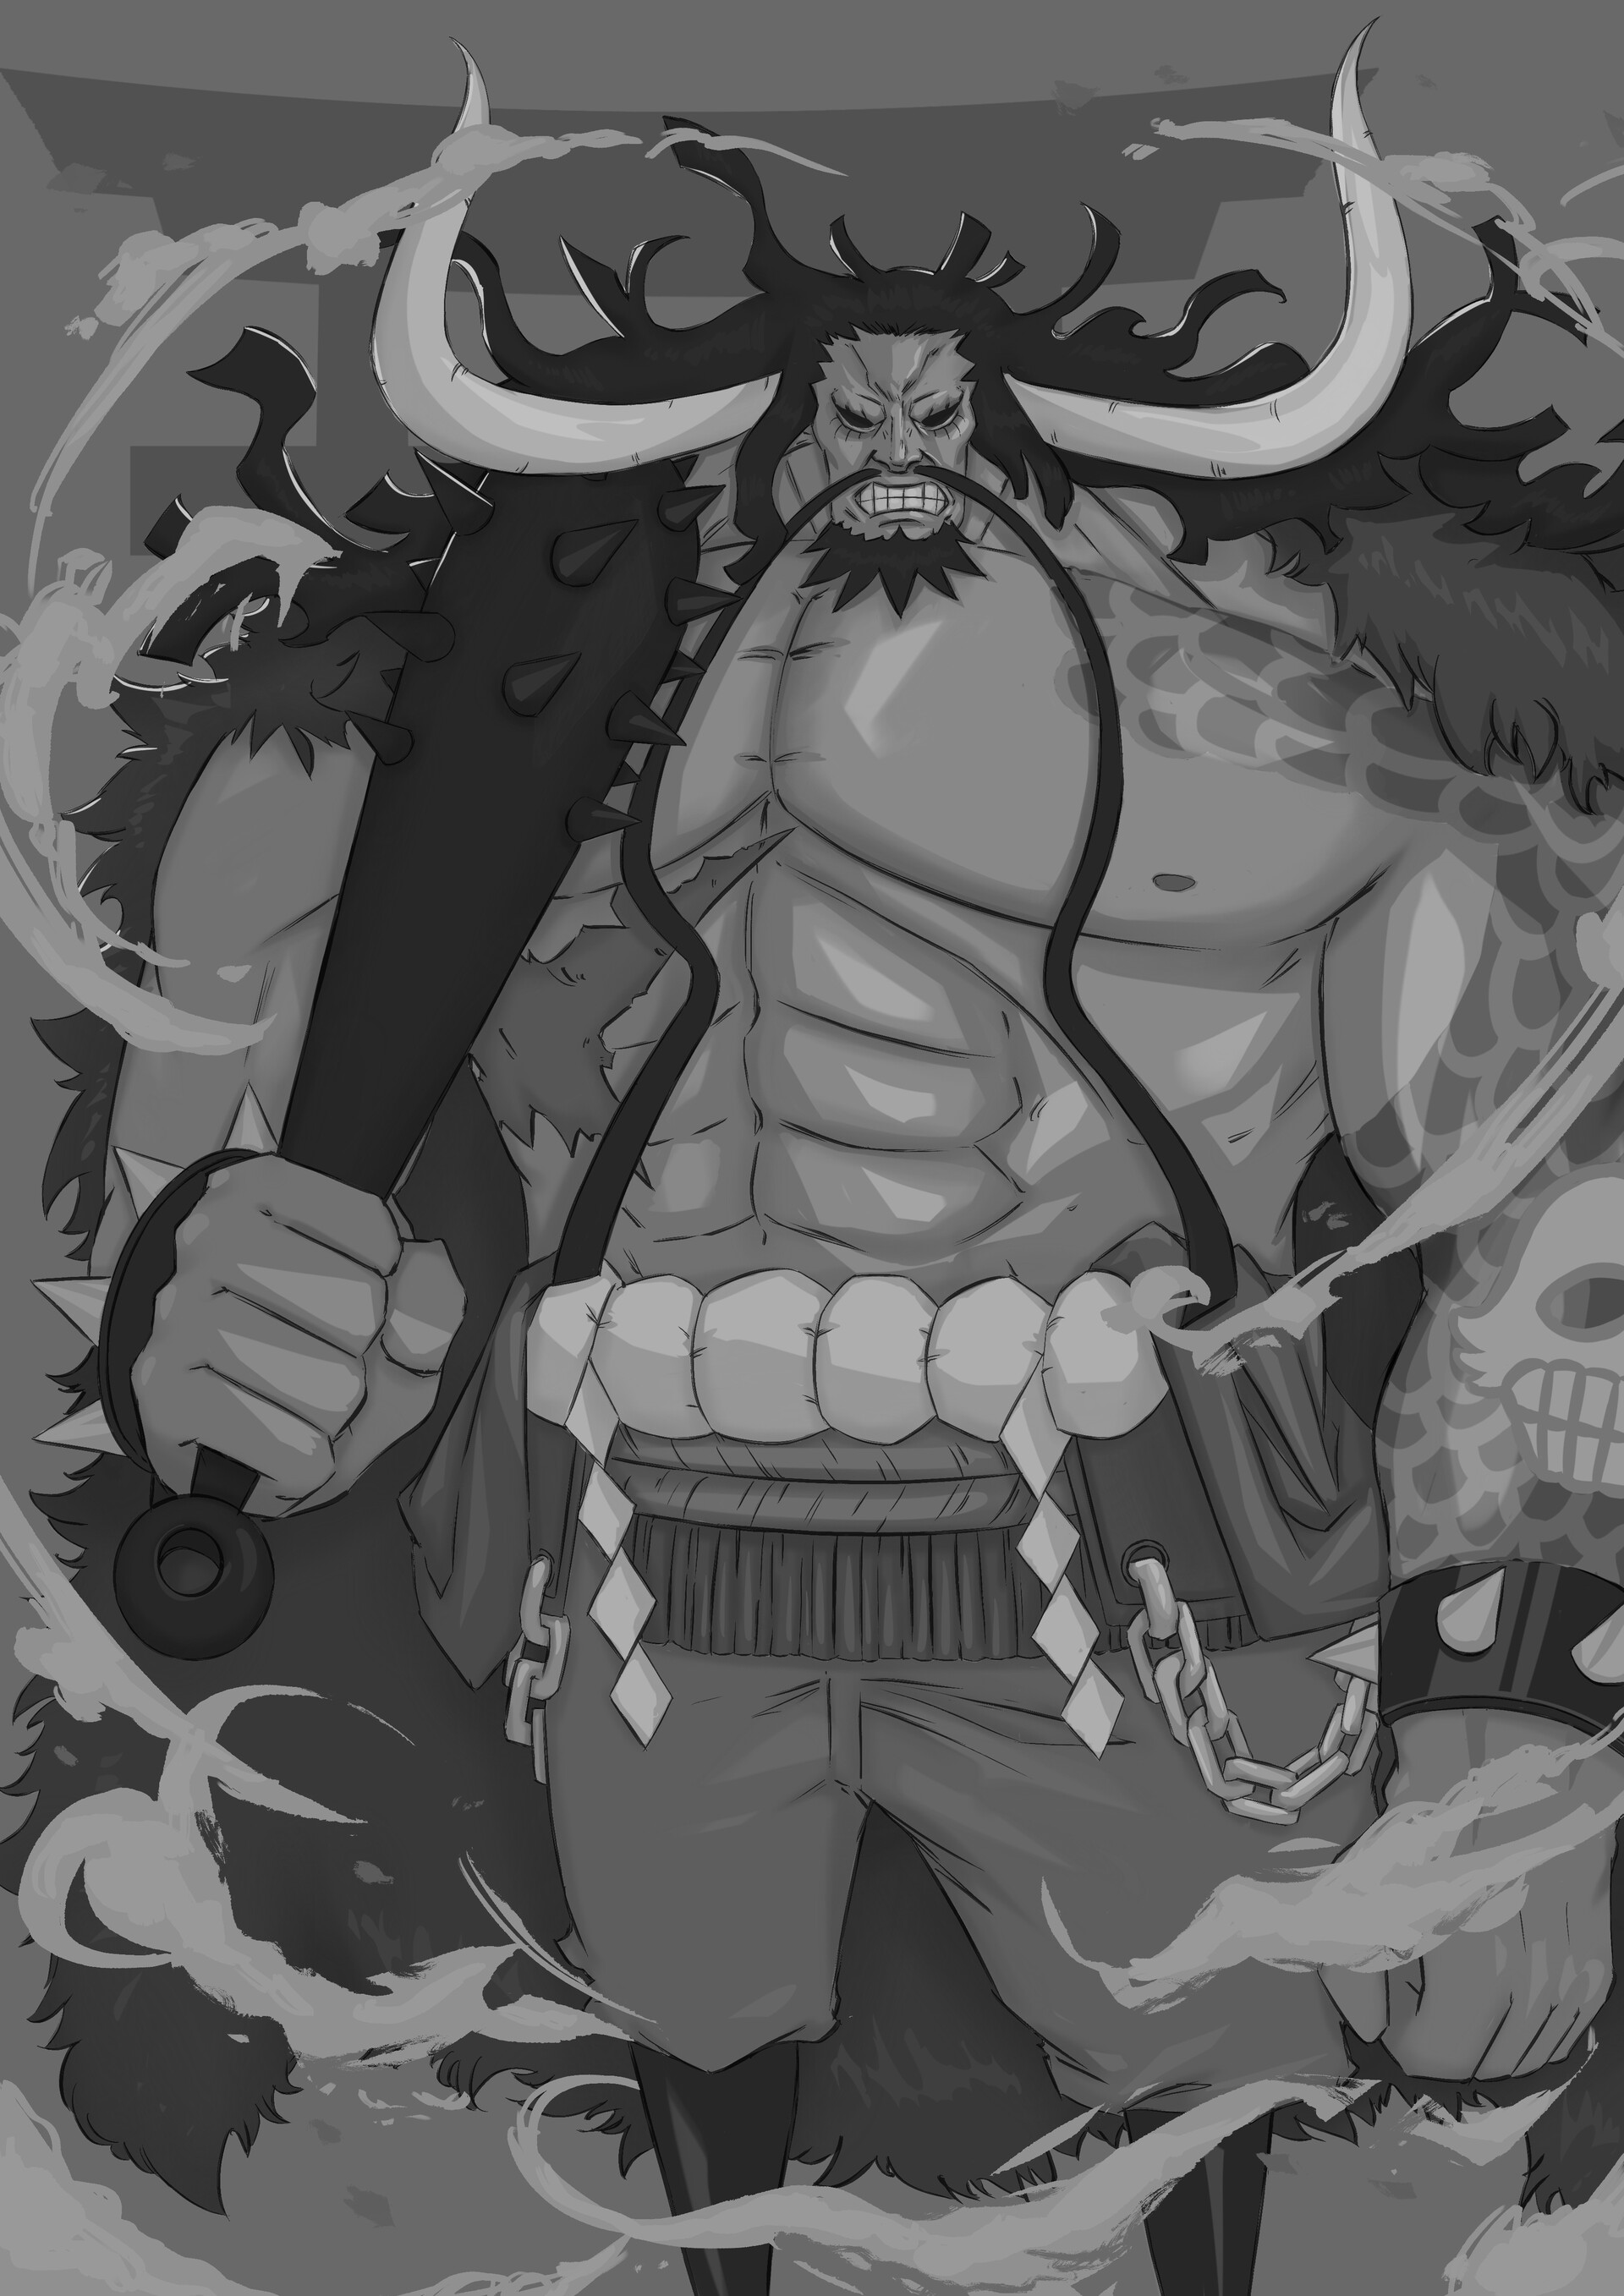 borjal on X: Kaido. I wanted to sculpt muscles onto a roblox body so I  chose to try and make kaido, fully textured and finished, showing the back,  inner arms, and obliques/serratus